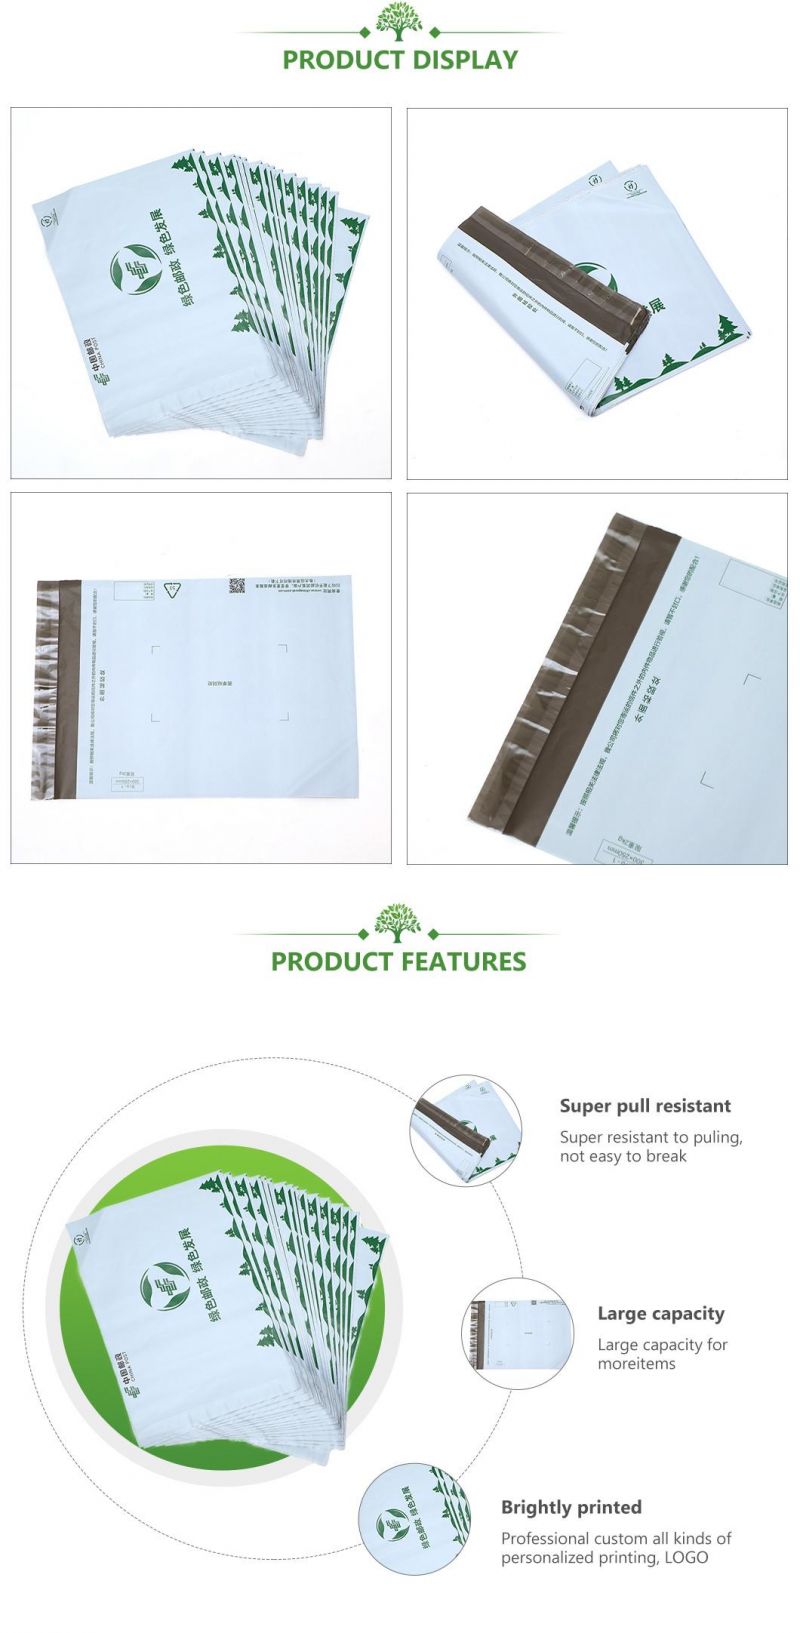 Biodegradable Bags Compostable Courier Bags, Mailing Bags, Poly Mailer Bags, Delivery Bags, Express Bagsmanufacturer with FDA, Brc, BSCI, CE, Grs, Bpi, Seeding